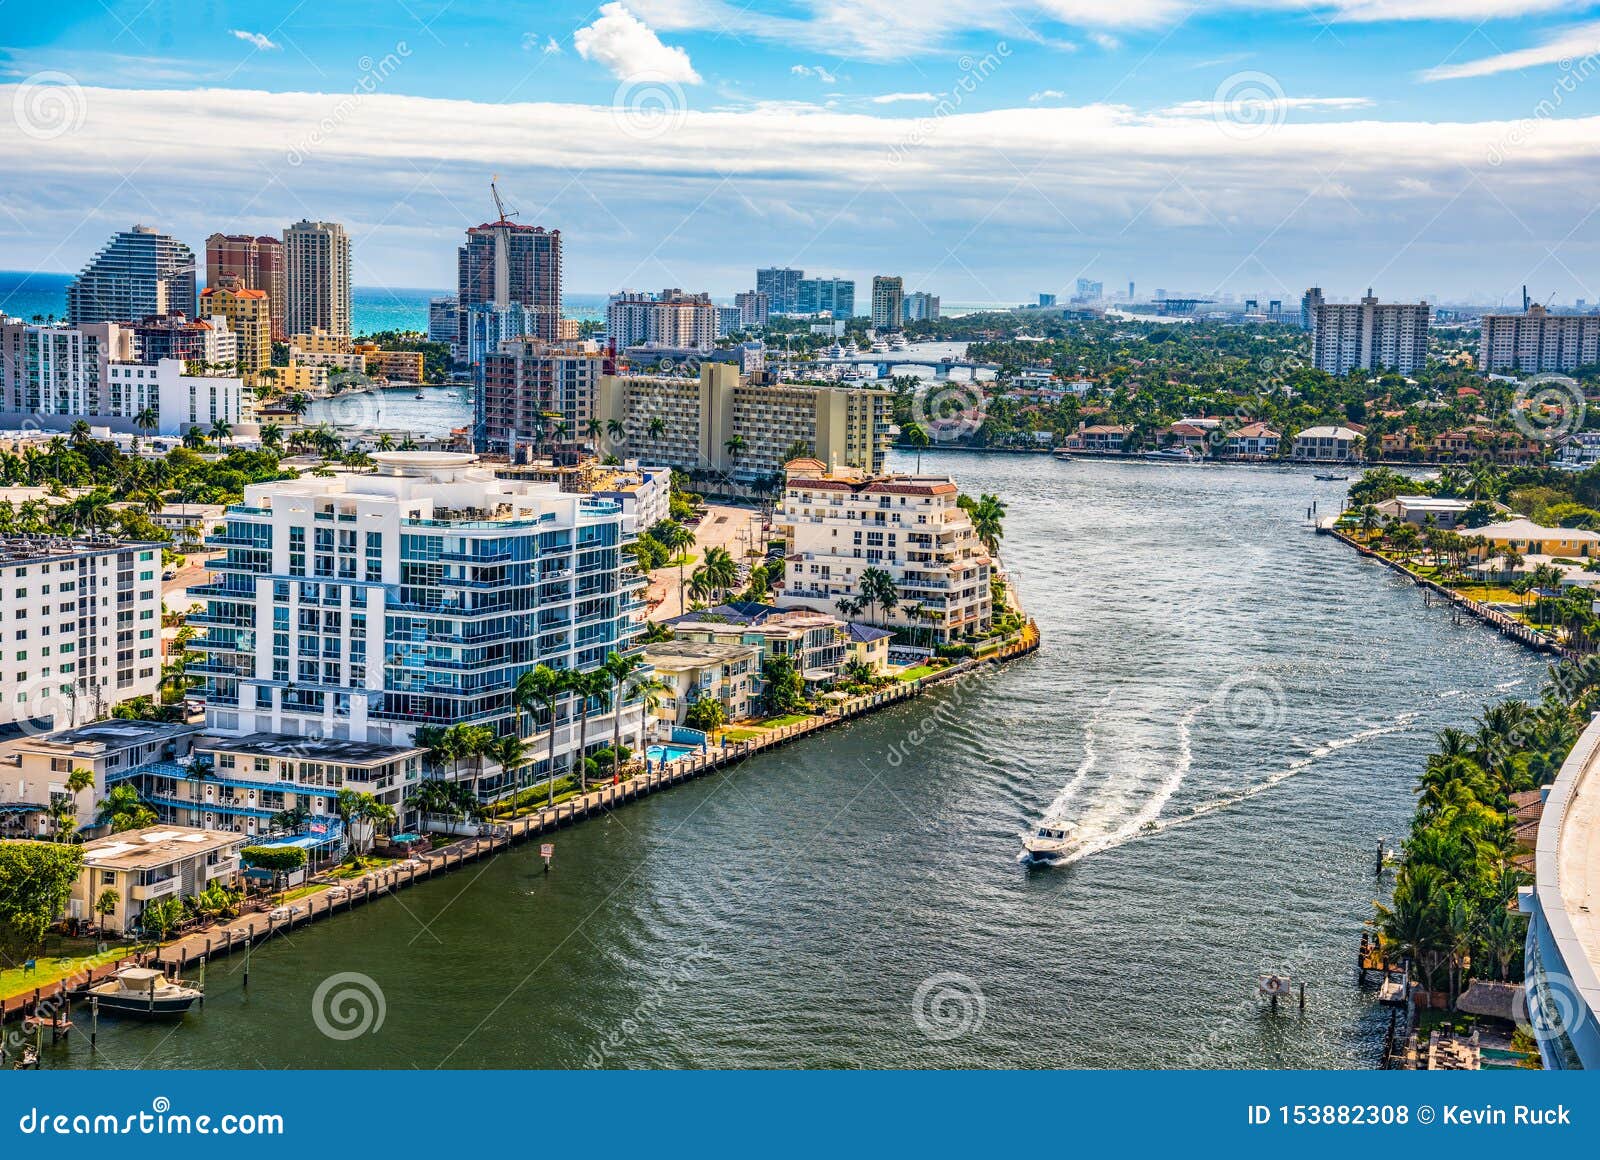 intracoastal waterway in fort lauderdale, florida, usa